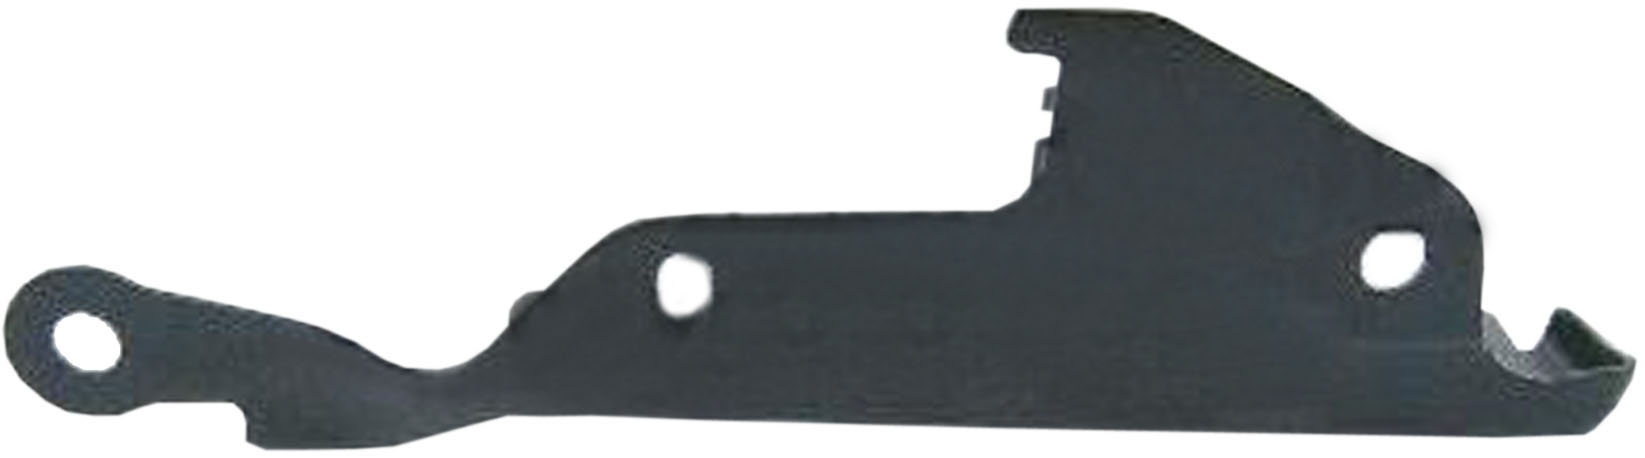 Aftermarket HOOD HINGES for GMC - SIERRA 1500 CLASSIC, SIERRA 1500 CLASSIC,07-07,Hood hinge assy